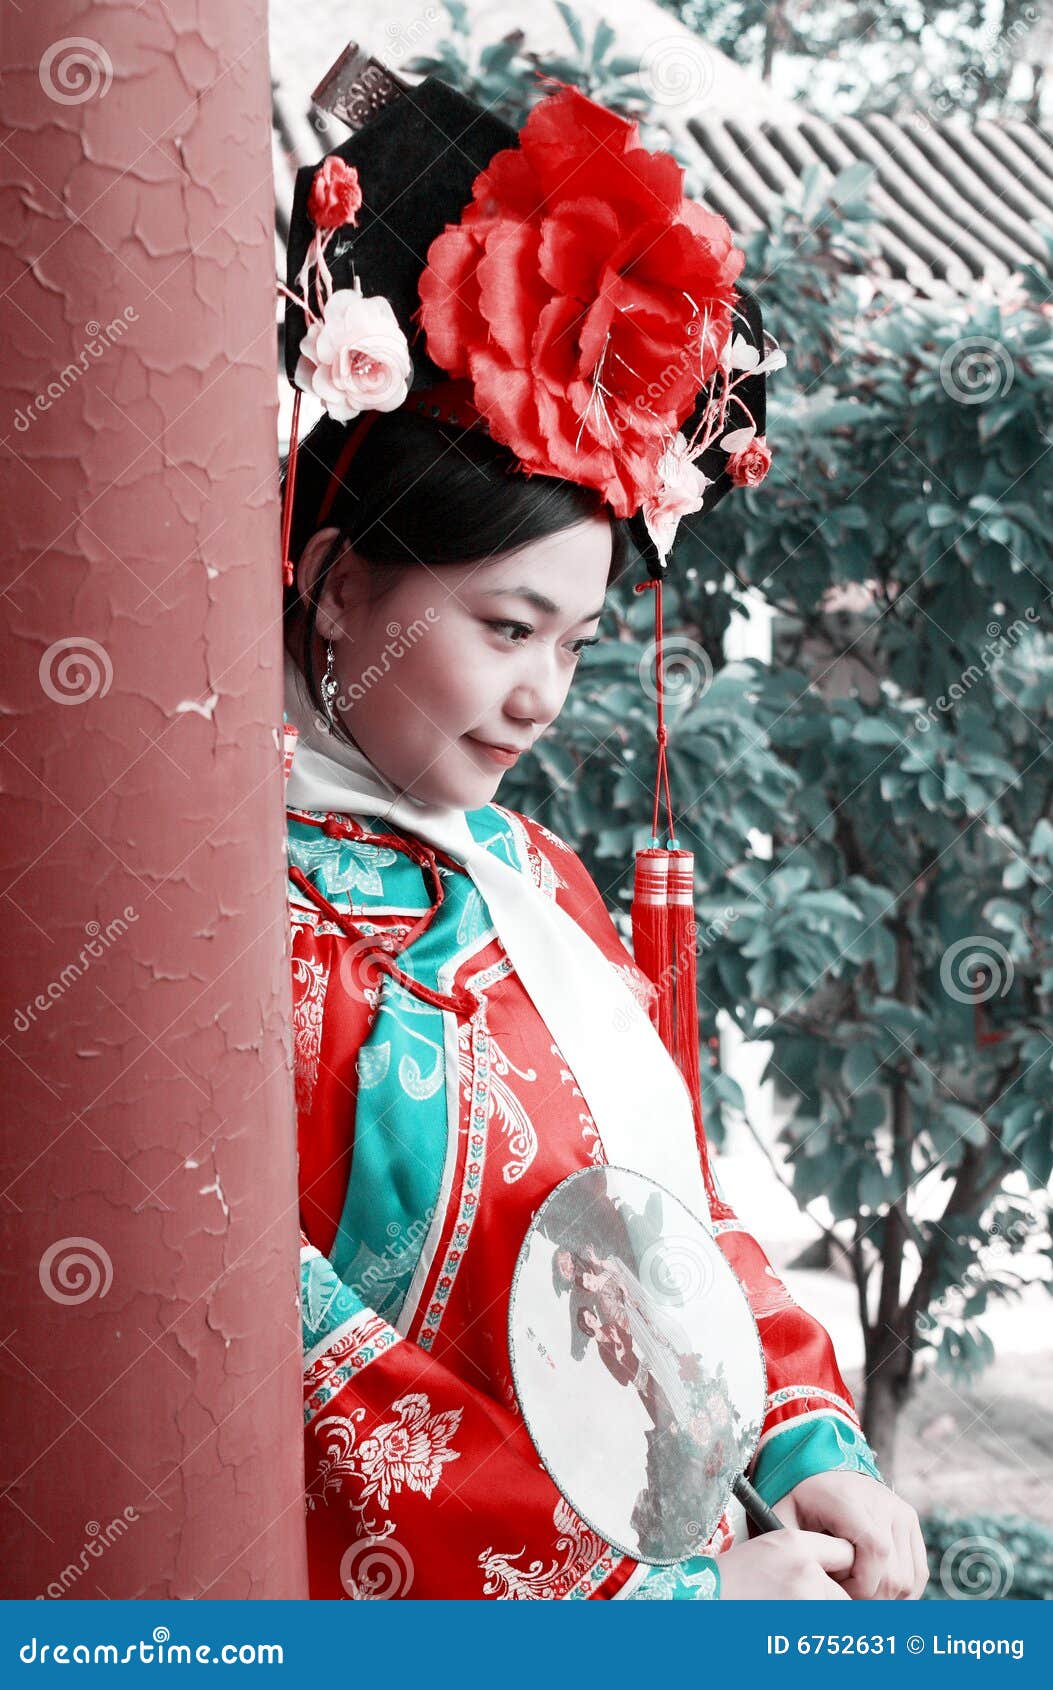 Chinese Girl in Ancient Dress Stock Image - Image of culture, 2008: 6752631